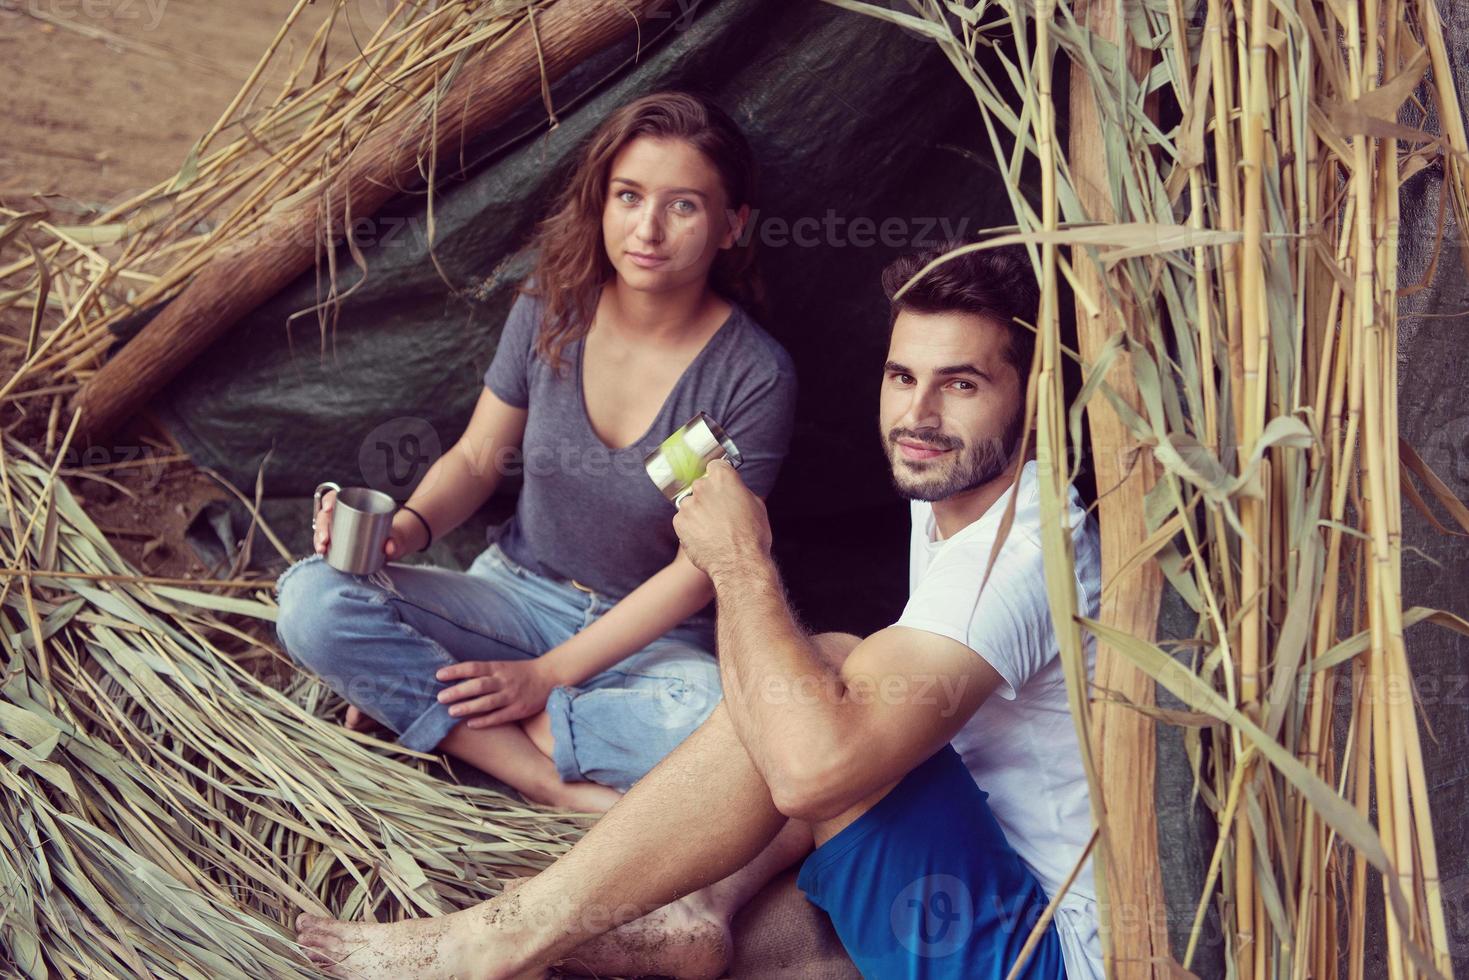 couple spending time together in straw tent photo